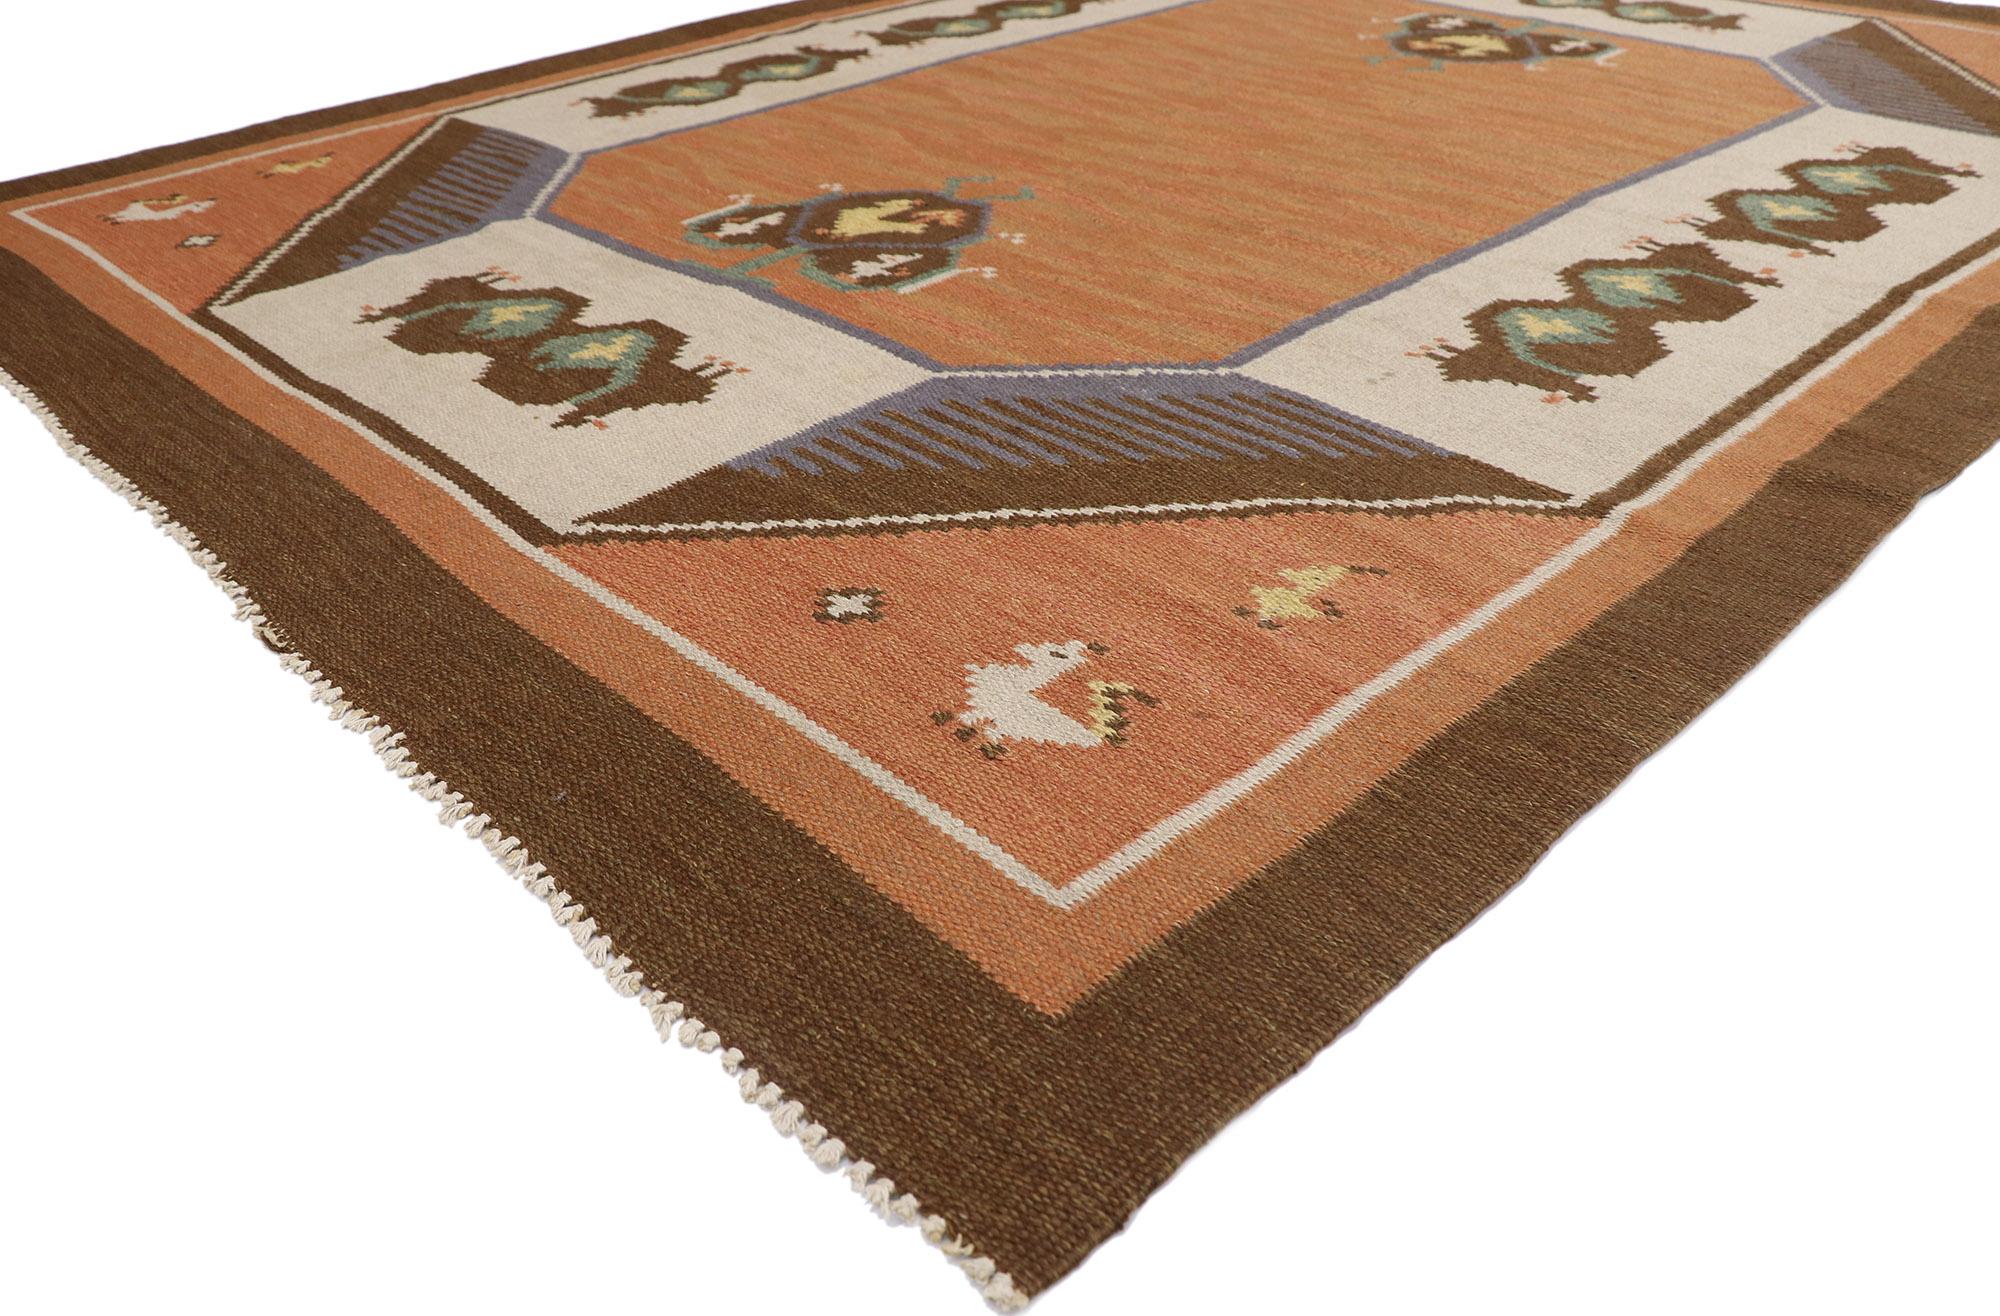 78110, vintage Swedish Rollakan Kilim rug with Scandinavian Modern style. With its geometric design and modern hygge vibes, this hand-woven wool Swedish Kilim rug beautifully embodies the simplicity of Scandinavian modern style. Animals and a cross